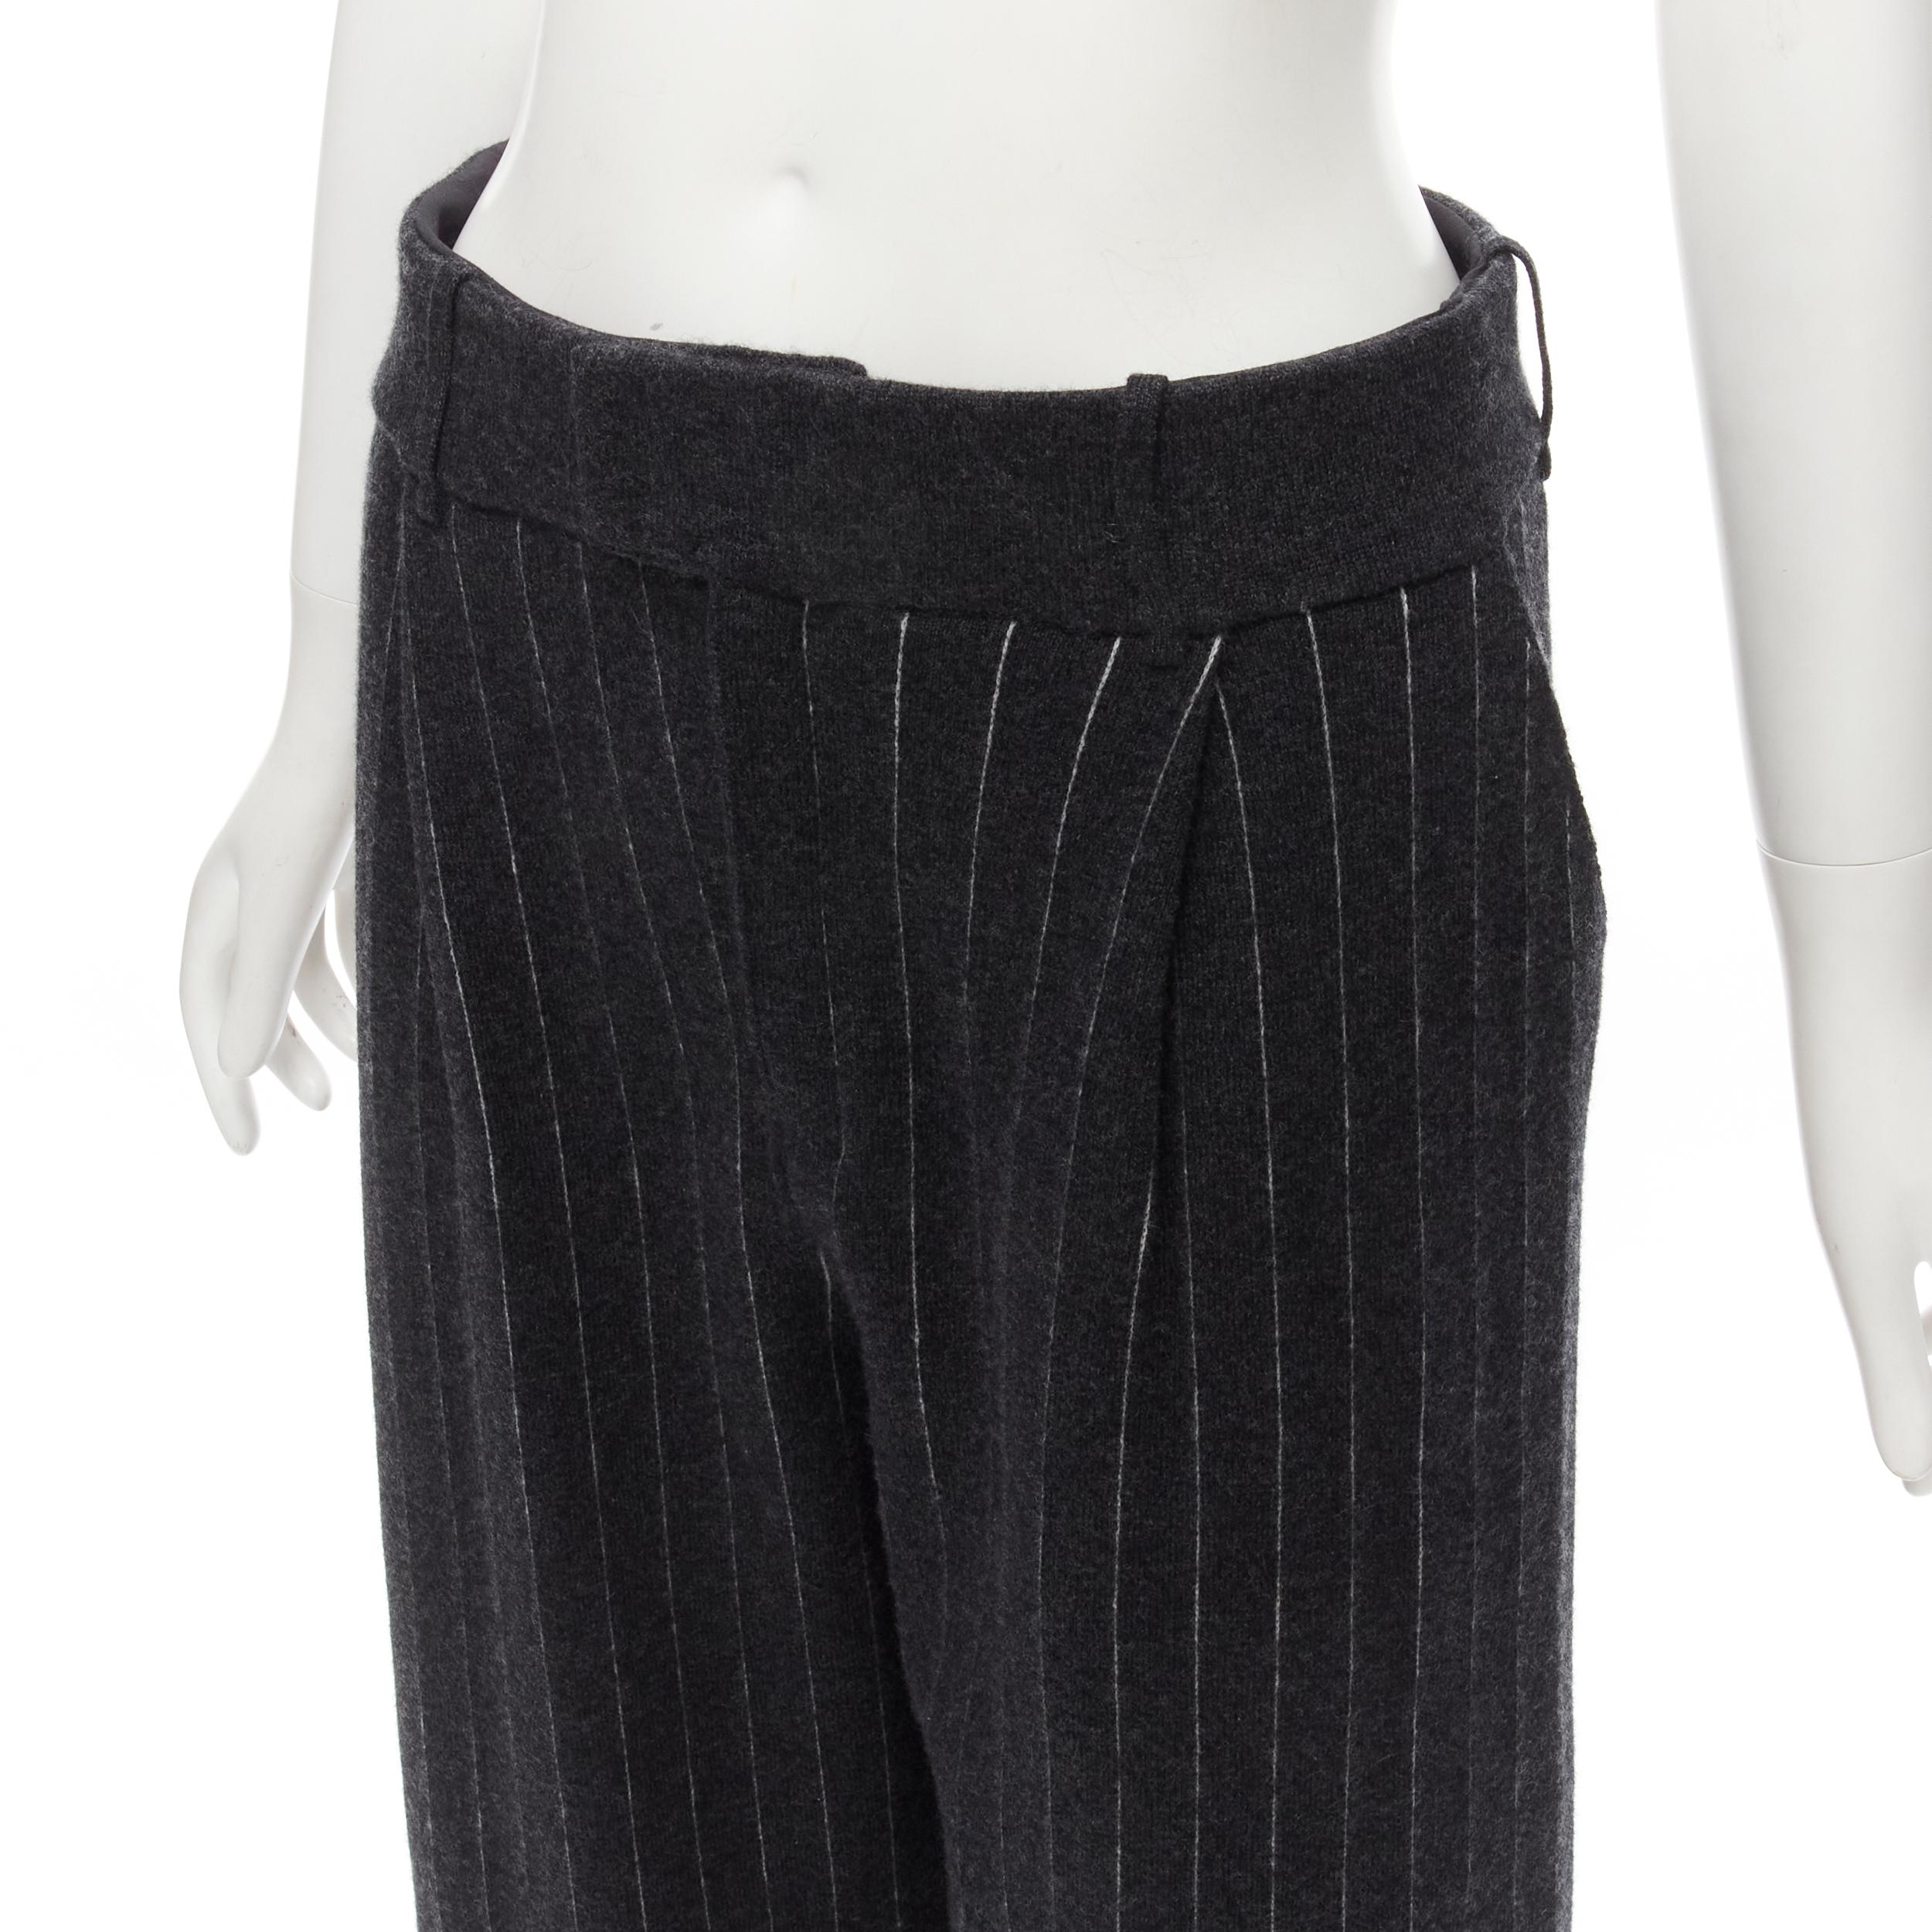 new BARRIE 100% pure cashmere dark grey pinstriped pleated wide leg pants M
Brand: Barrie
Material: 100% Cashmere
Color: Grey
Pattern: Pinstriped
Closure: Zip Fly
Extra Detail: Hook eye zip fly closure. 4-pocket design. Pleat front. Wide leg